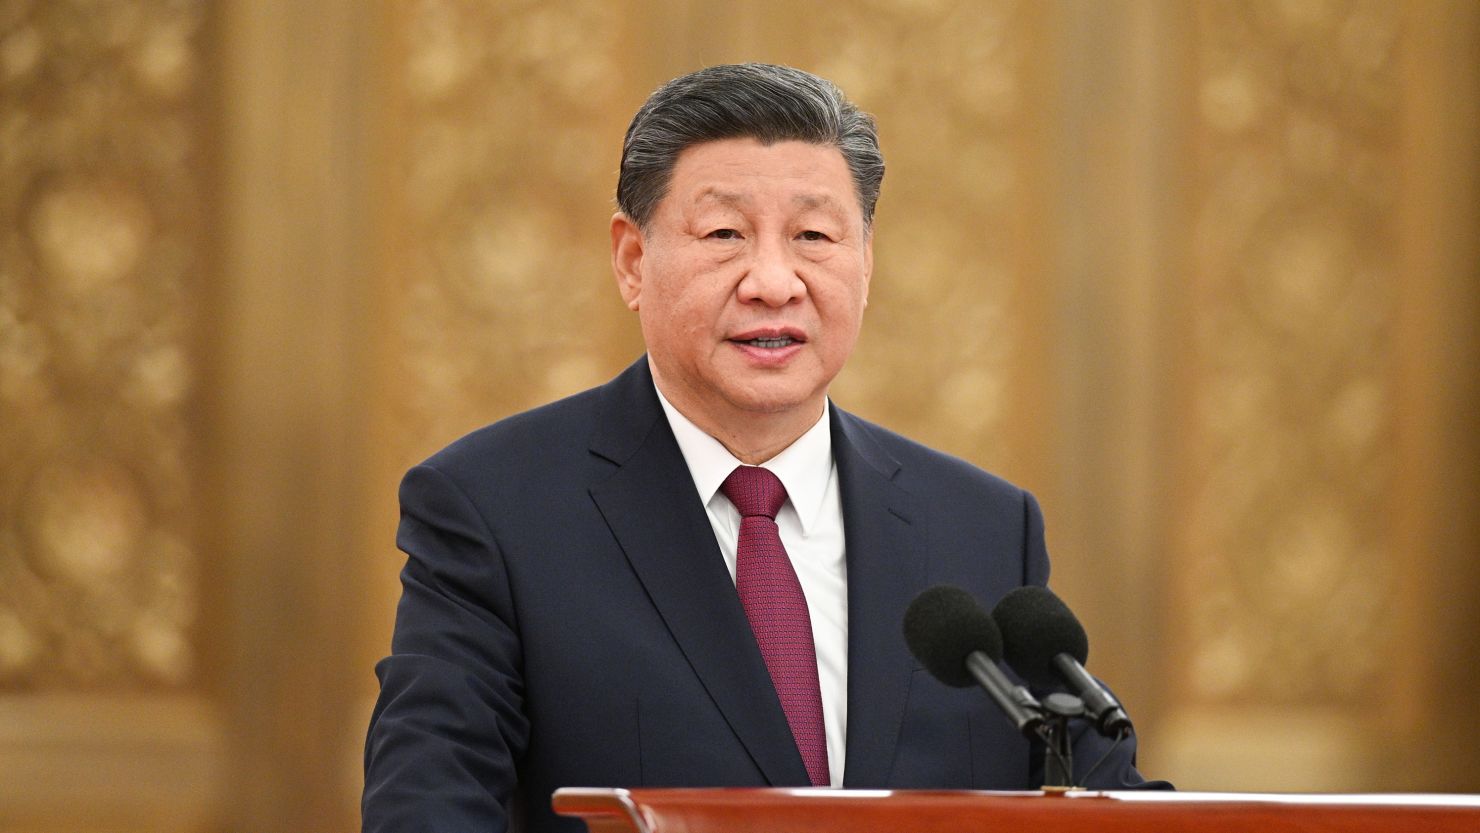 Chinese President Xi Jinping, also general secretary of the Communist Party of China CPC Central Committee and chairman of the Central Military Commission, delivers an important speech during the meeting with Chinese diplomatic envoys to foreign countries, who are in Beijing to attend this year's work conference for overseas envoys, at the Great Hall of the People in Beijing, capital of China, Dec. 29, 2023. Cai Qi, a member of the Standing Committee of the Political Bureau of the CPC Central Committee and director of the General Office of the CPC Central Committee, was also present. (Photo by Li Xueren/Xinhua via Getty Images)